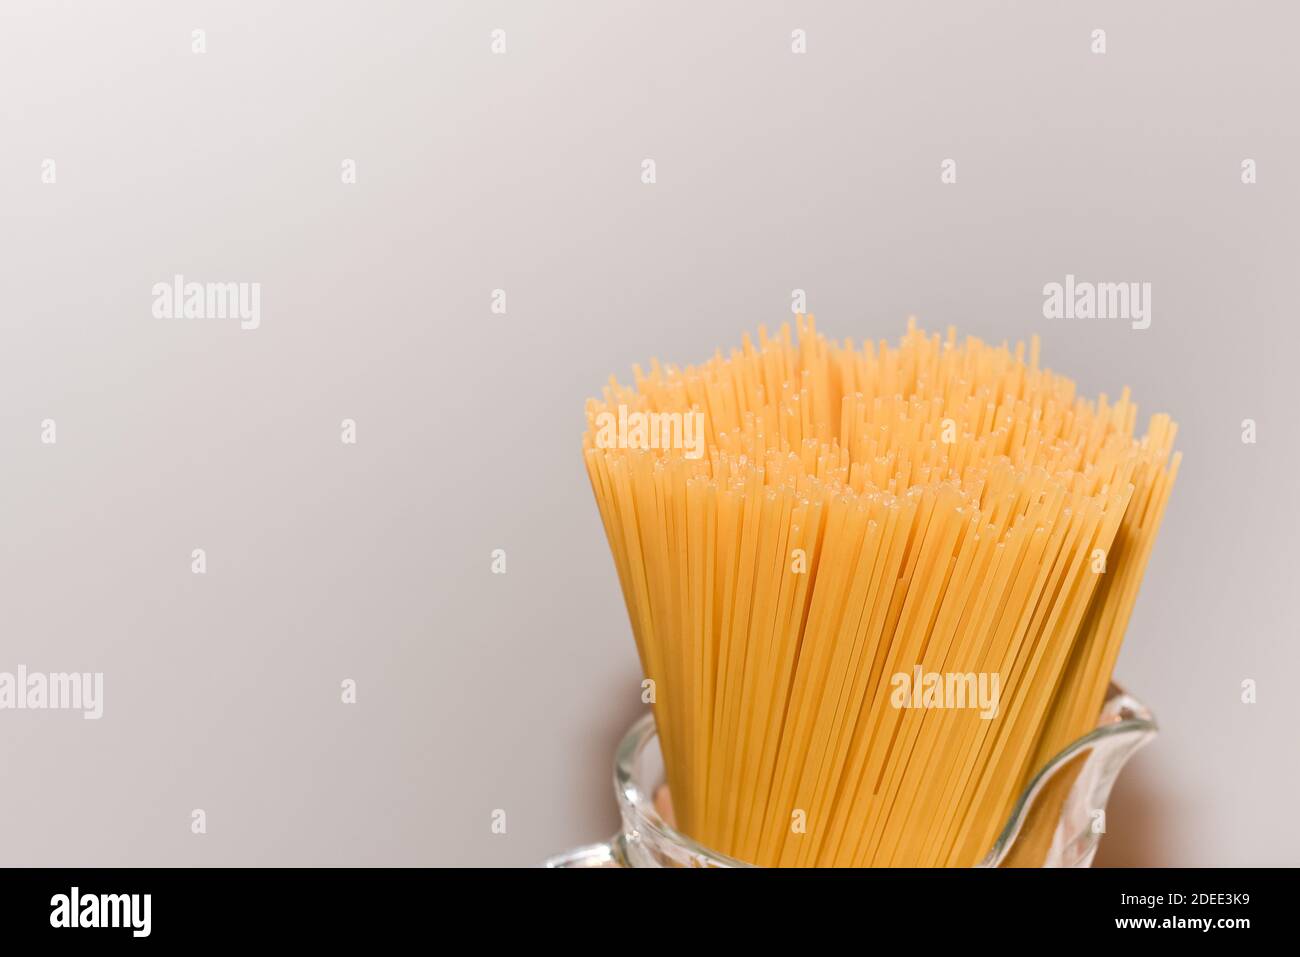 bunch of spaghetti straws, copy space for text for italian pasta food recipes Stock Photo